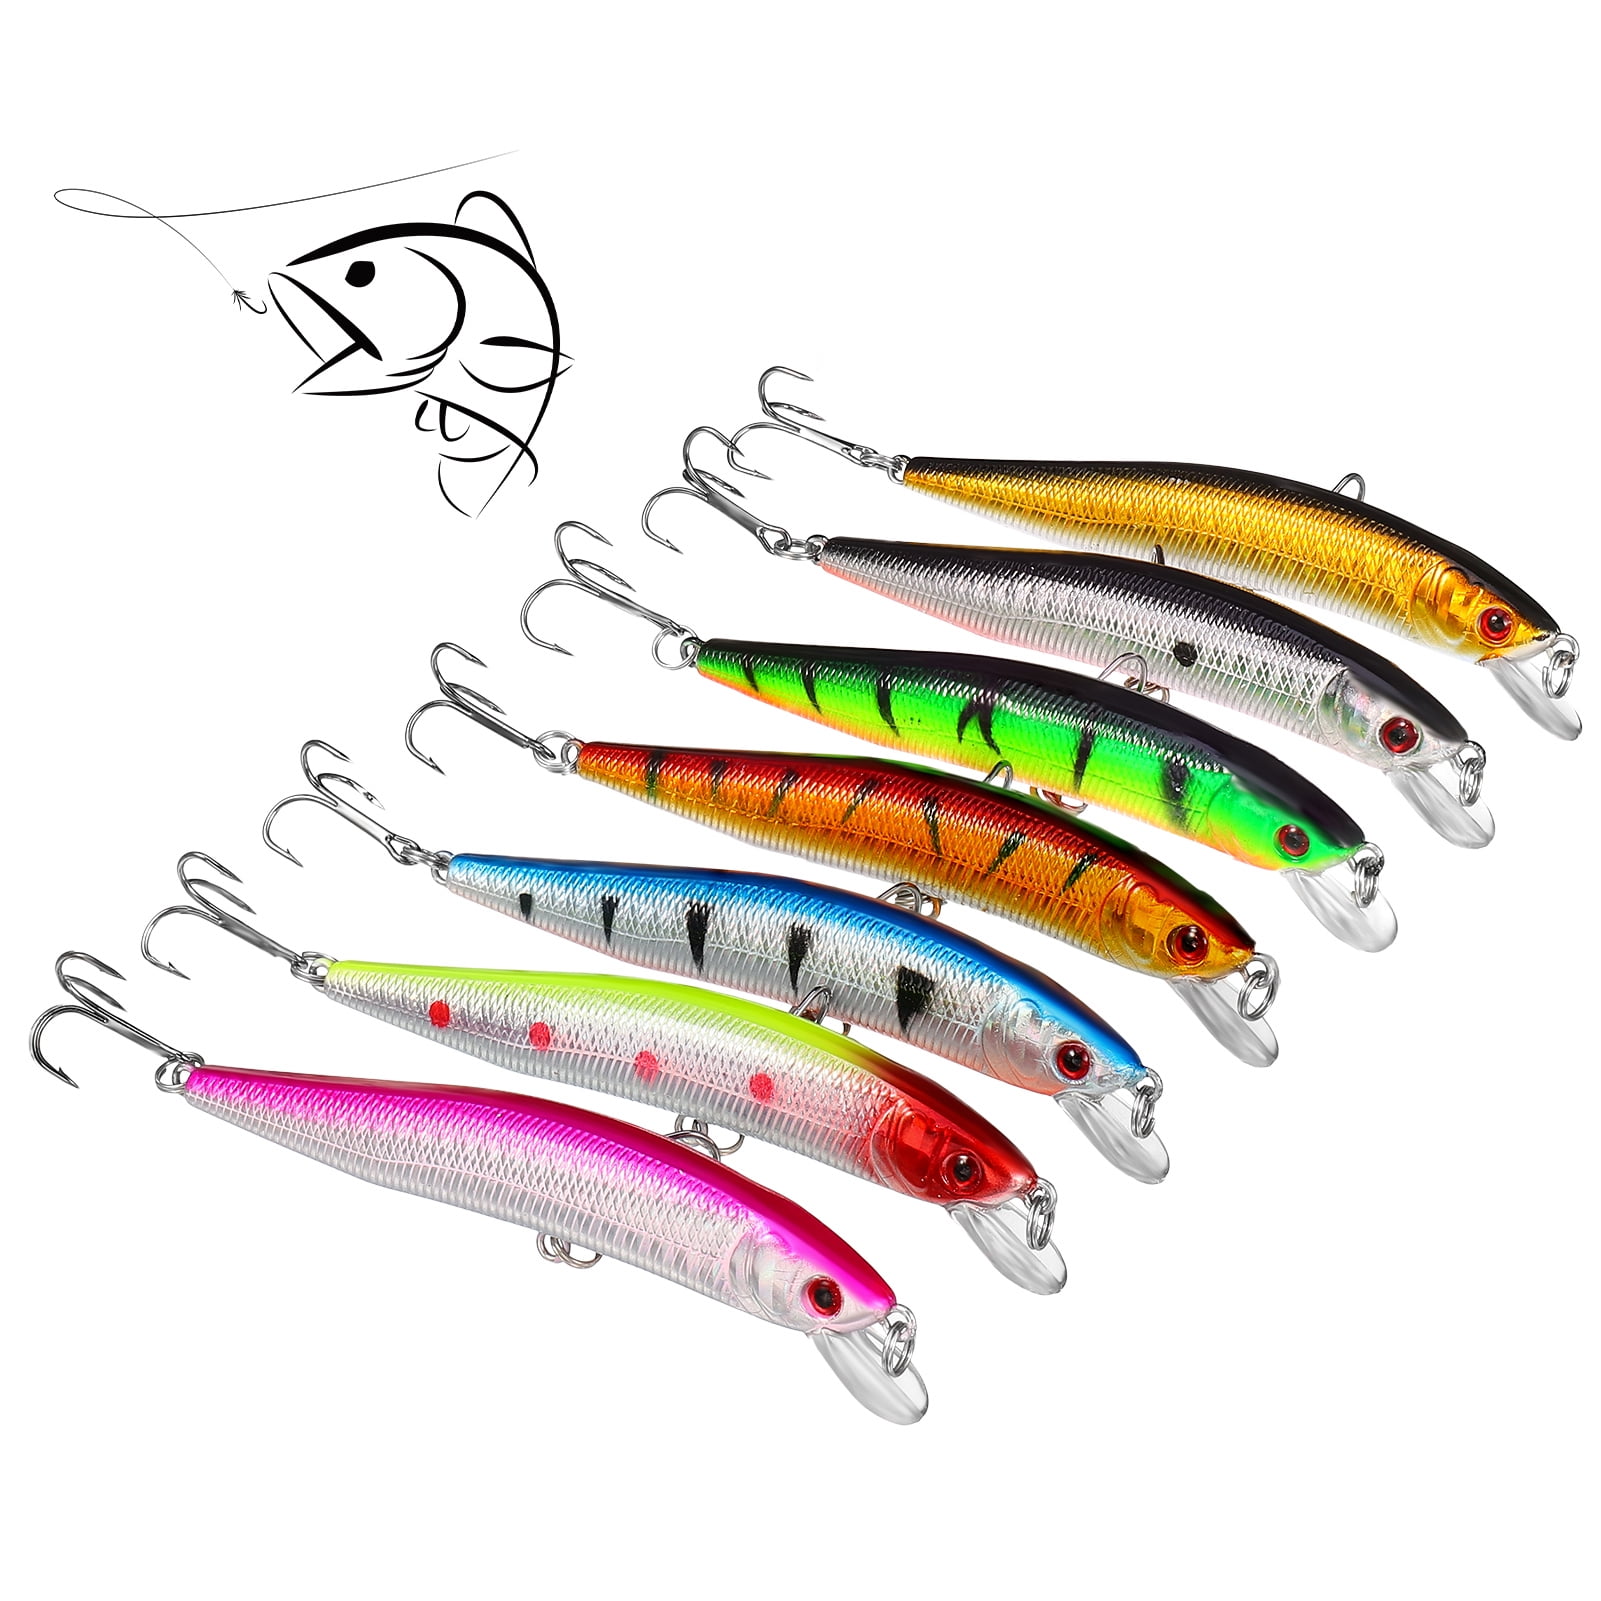 HEQUSIGNS 7 Pcs Fishing Lures Hard Minnow Baits, Life-Like Swimbait Fishing  Lures,Bass Fishing Lures Kit Set Topwater Hard Baits Minnow, for Bass Pike